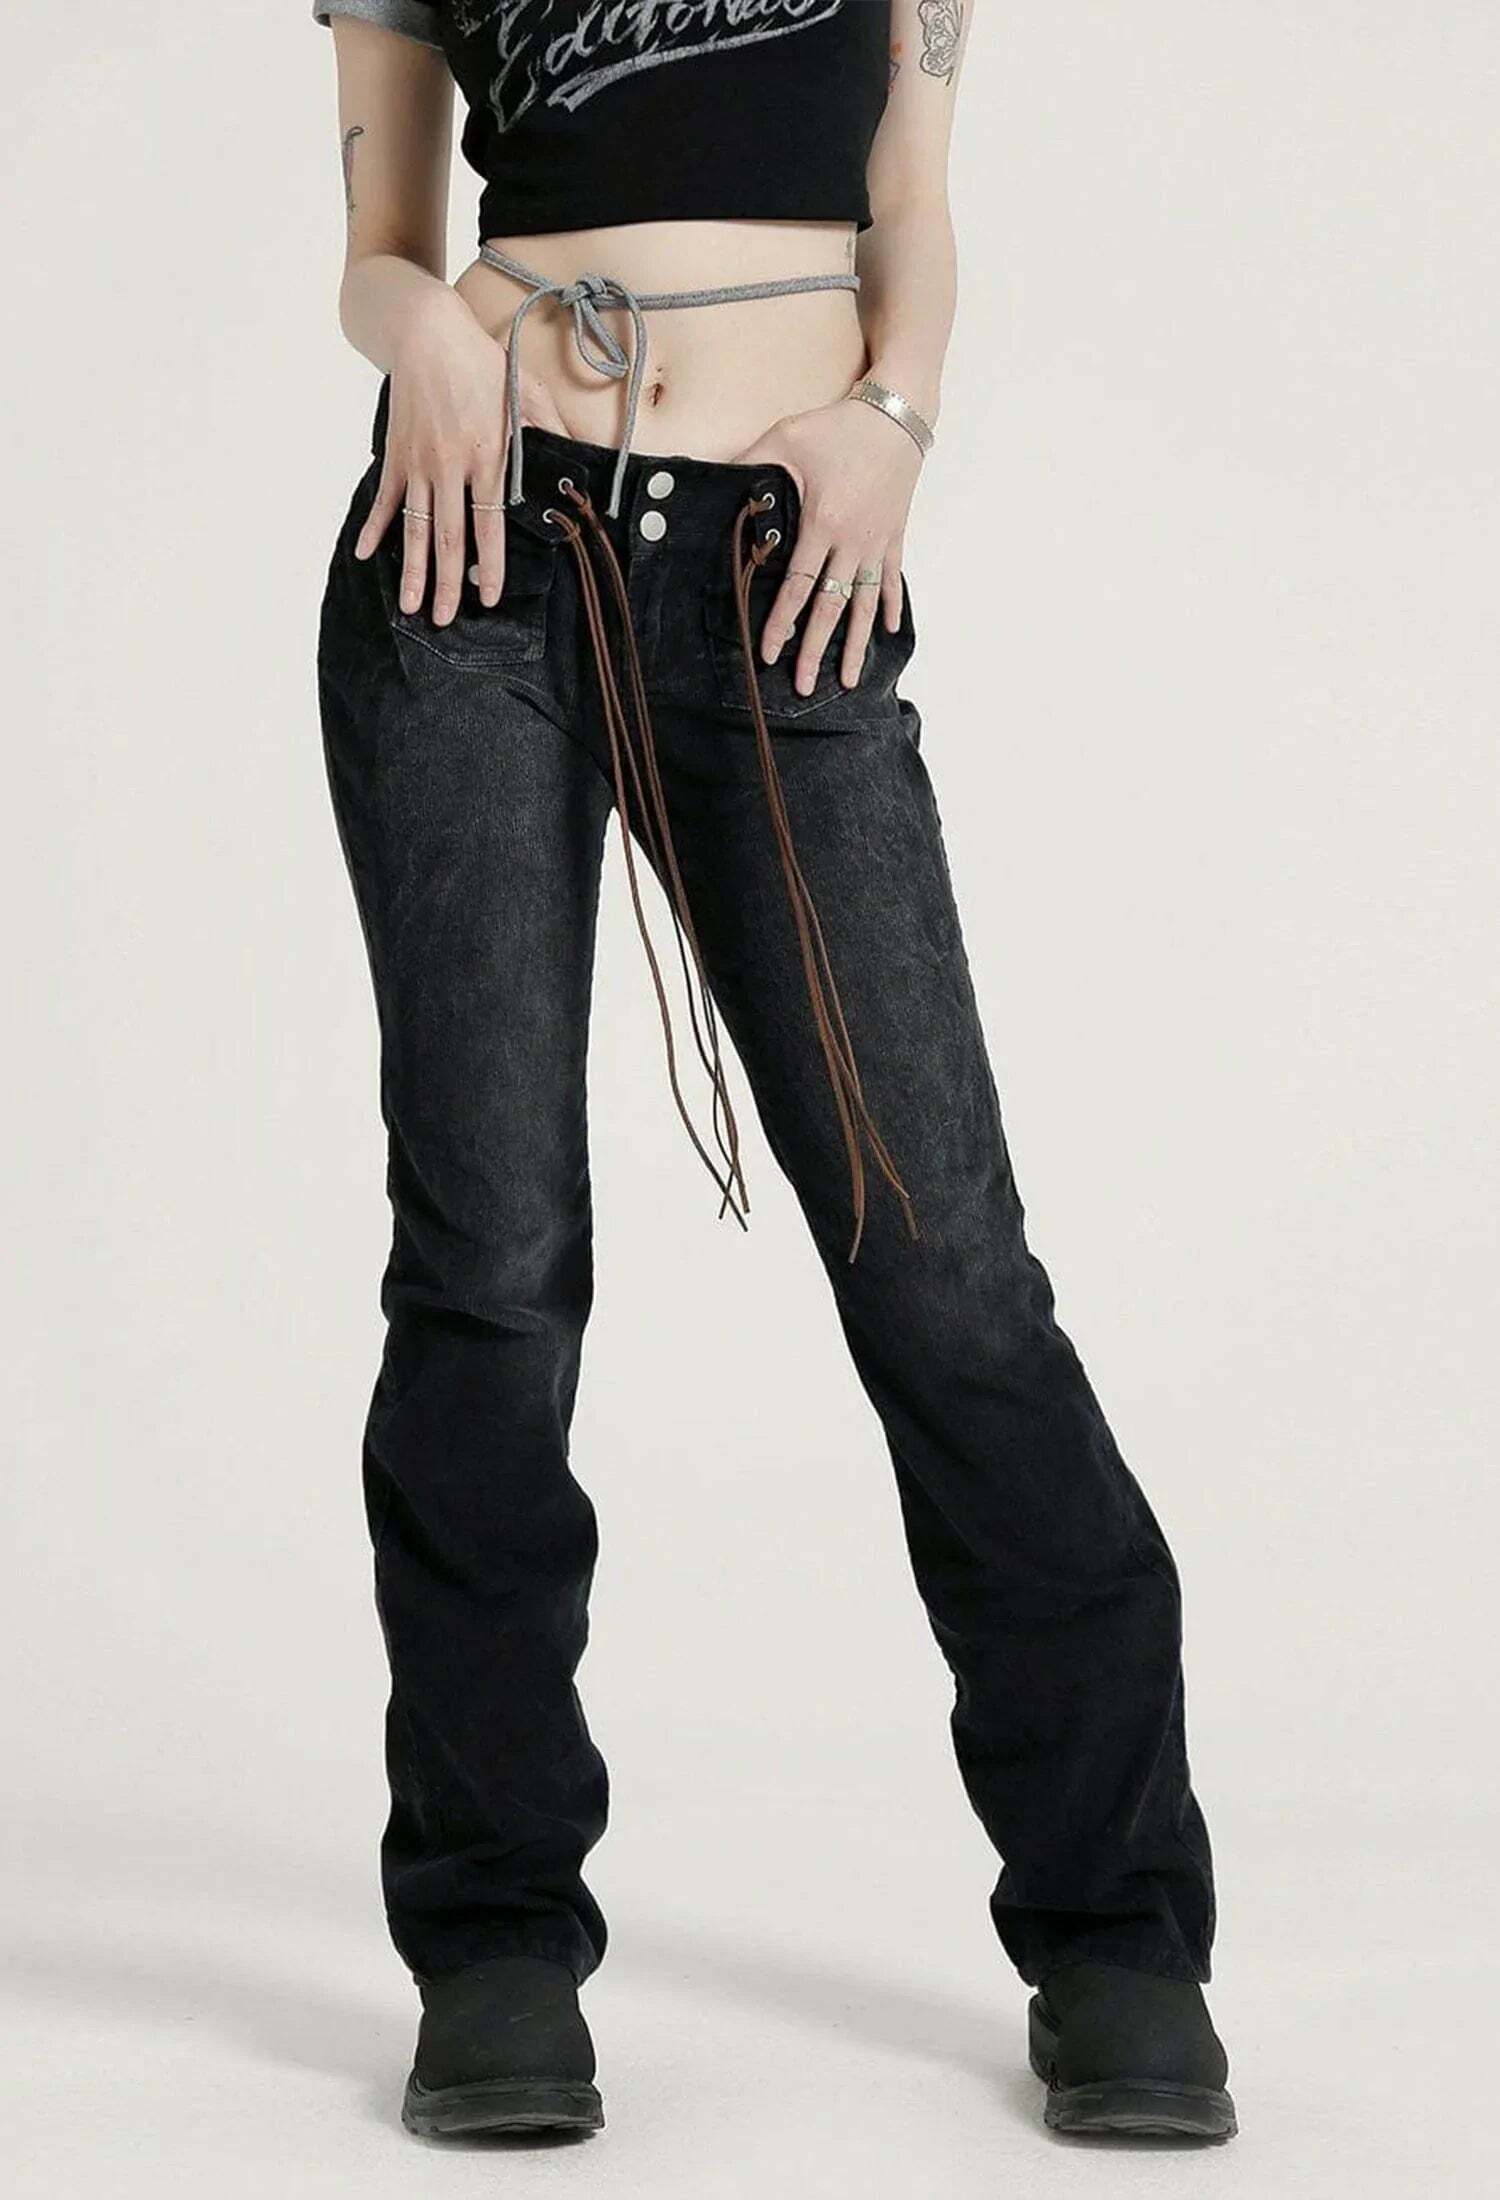 laceup flared jeans edgy streetwear essential 3954